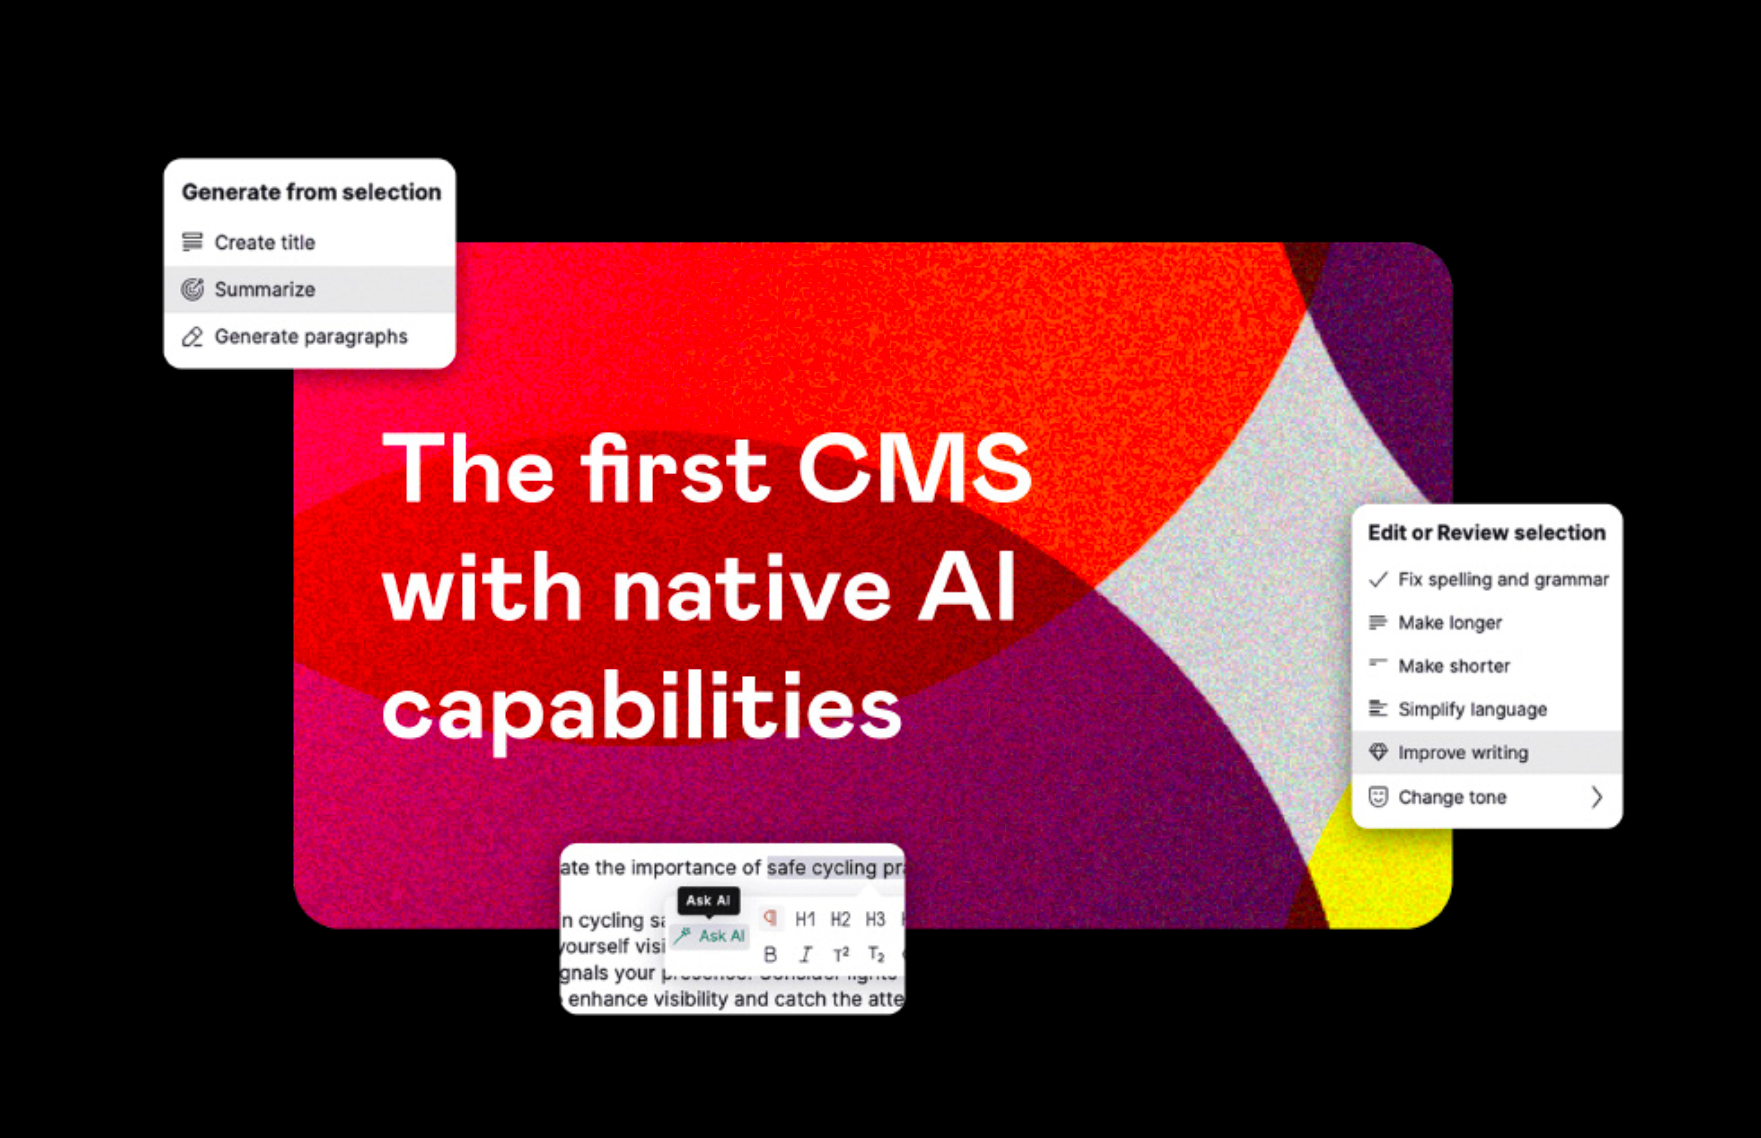 The first CMS with native AI capabilities